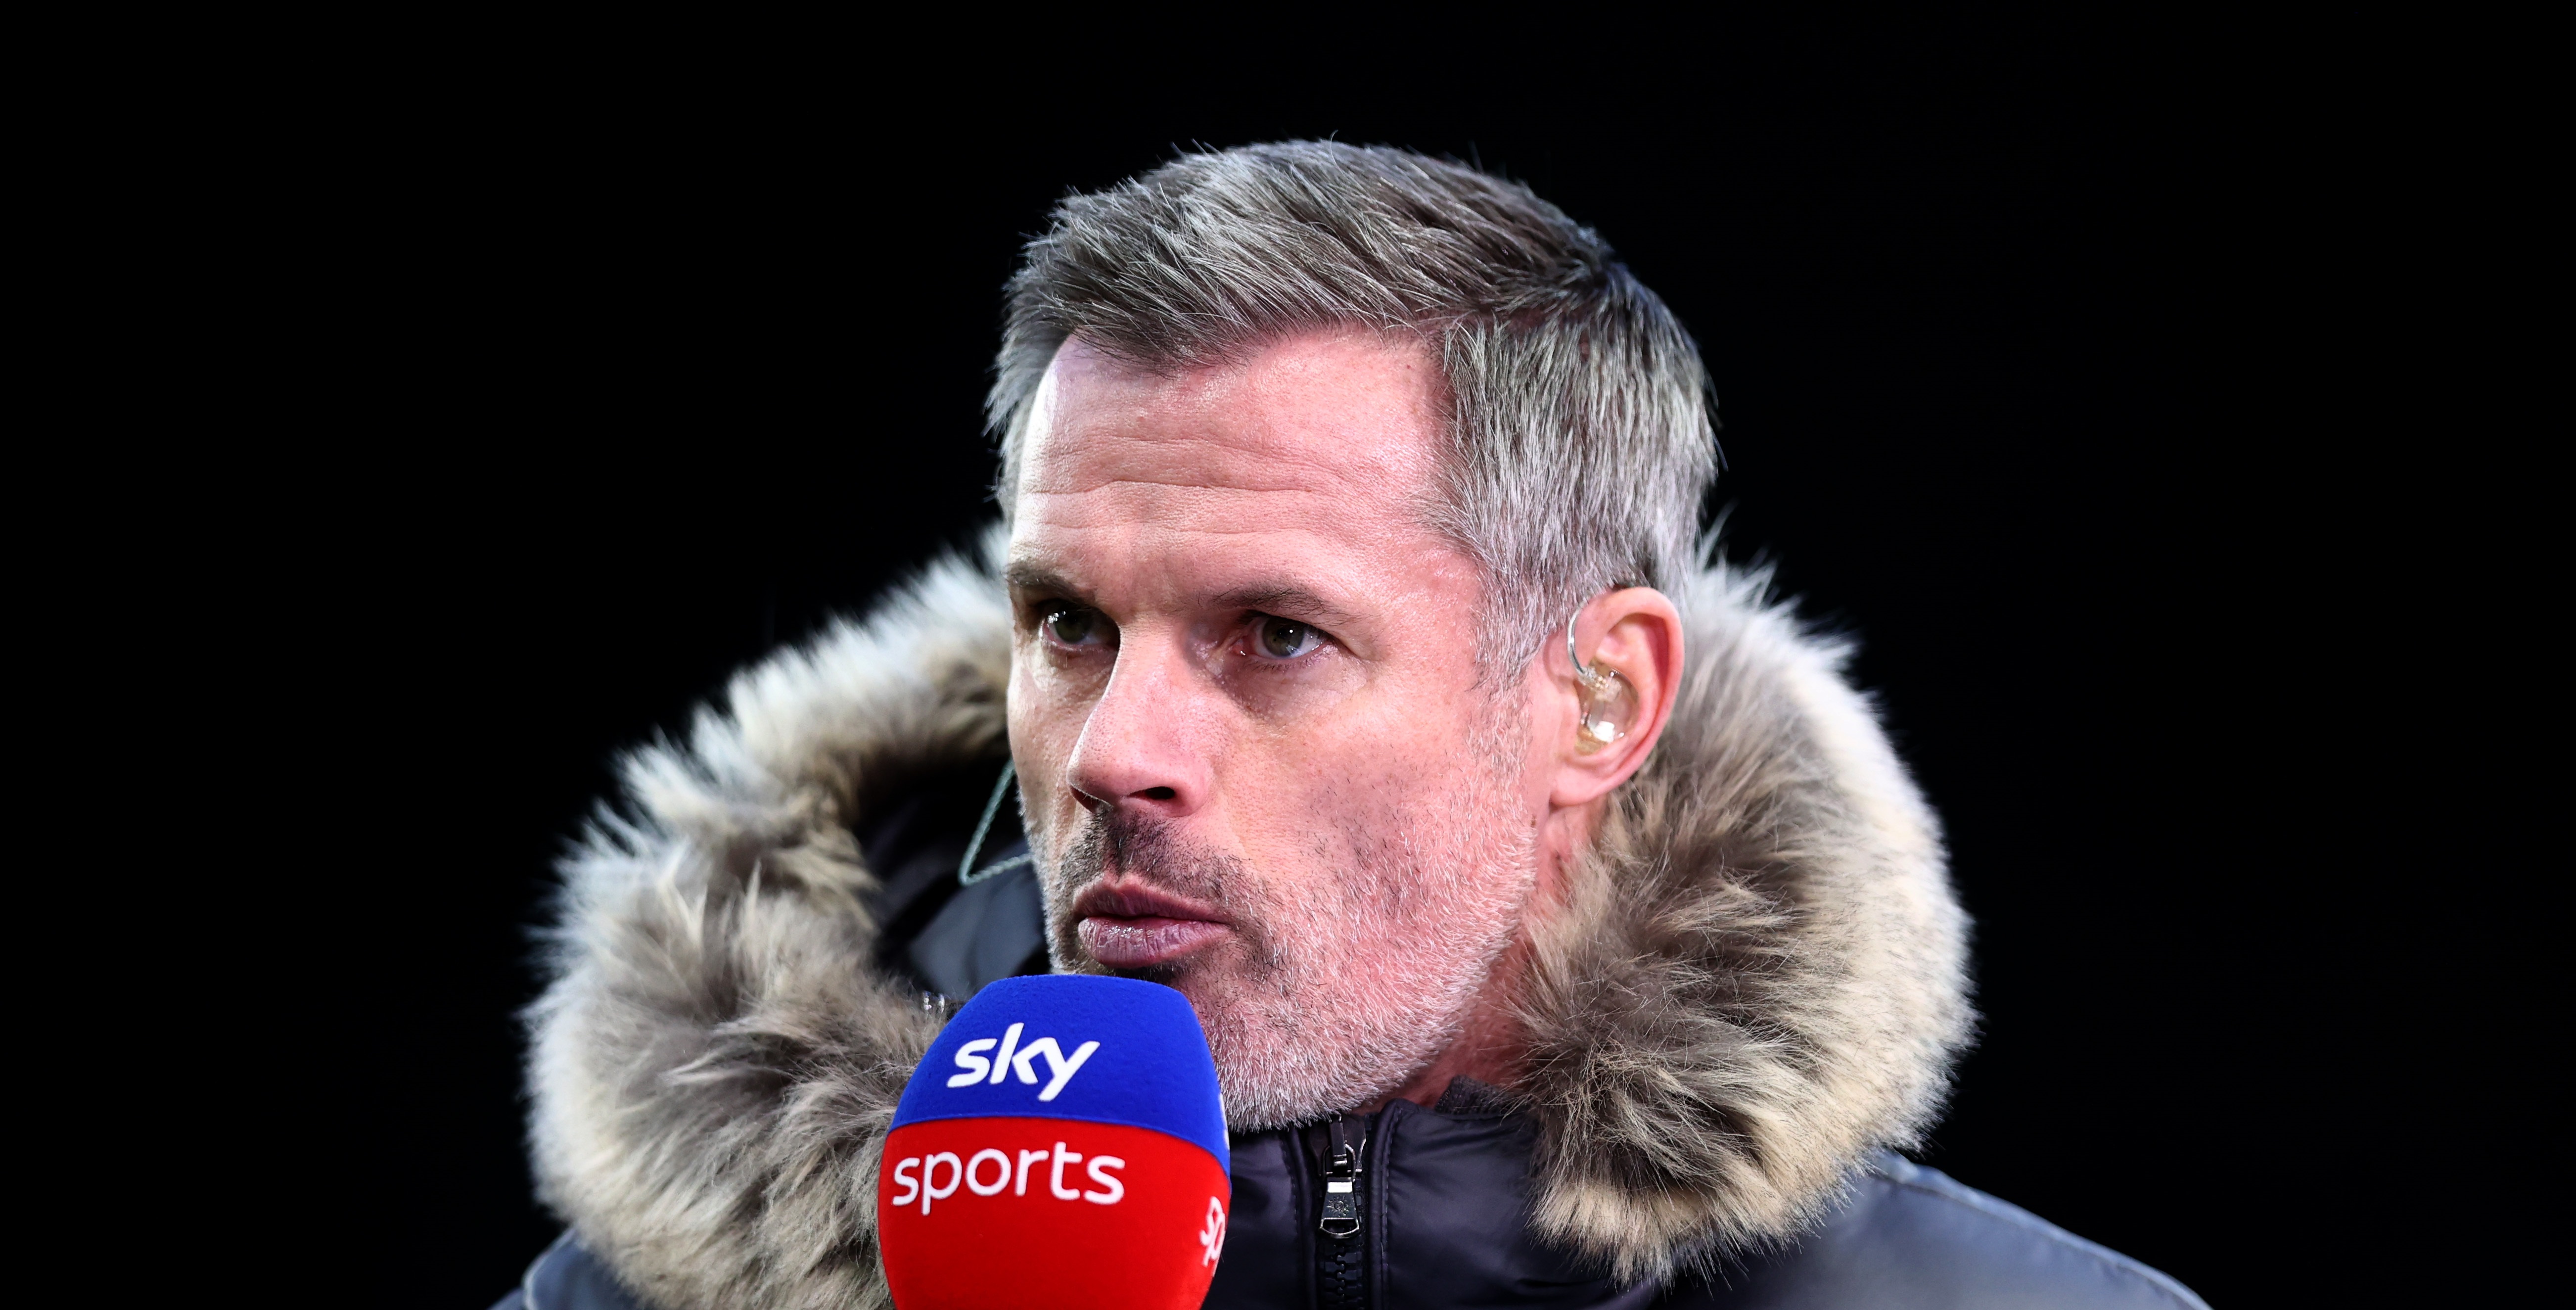 Jamie Carragher shocked by 28-year-old’s performance in ‘awful’ Liverpool showing v Nottingham Forest